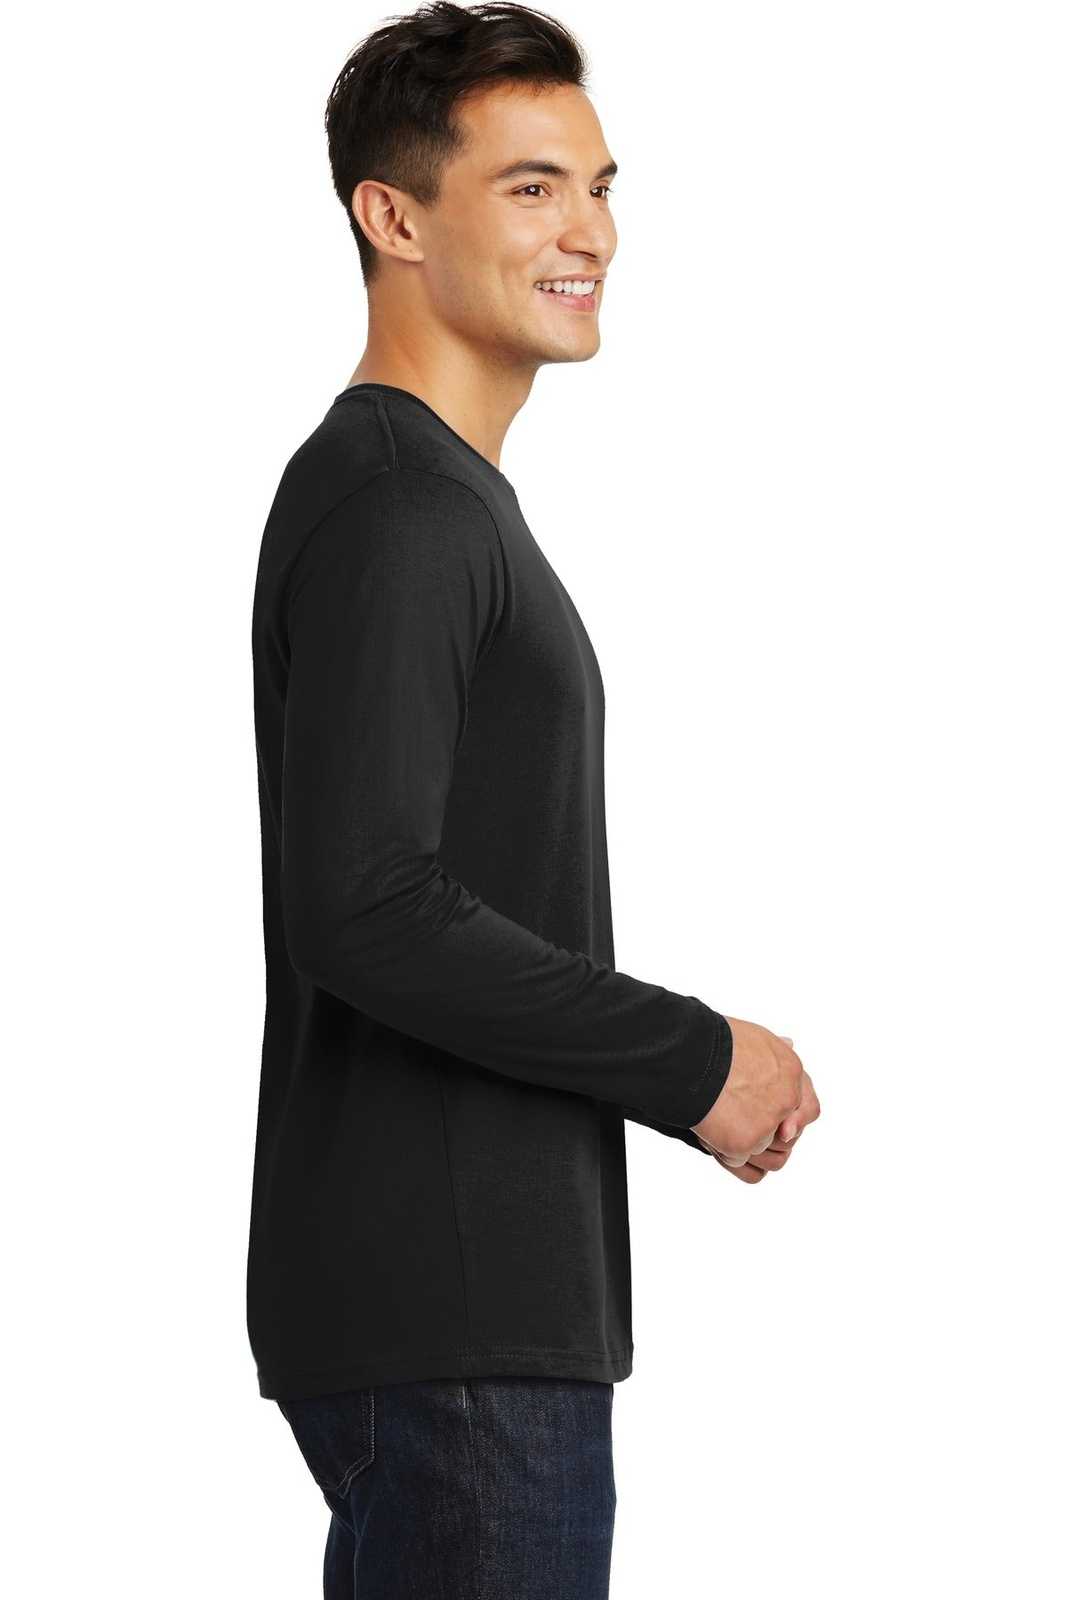 District DT105 Perfect Weight Long Sleeve Tee - Jet Black - HIT a Double - 3